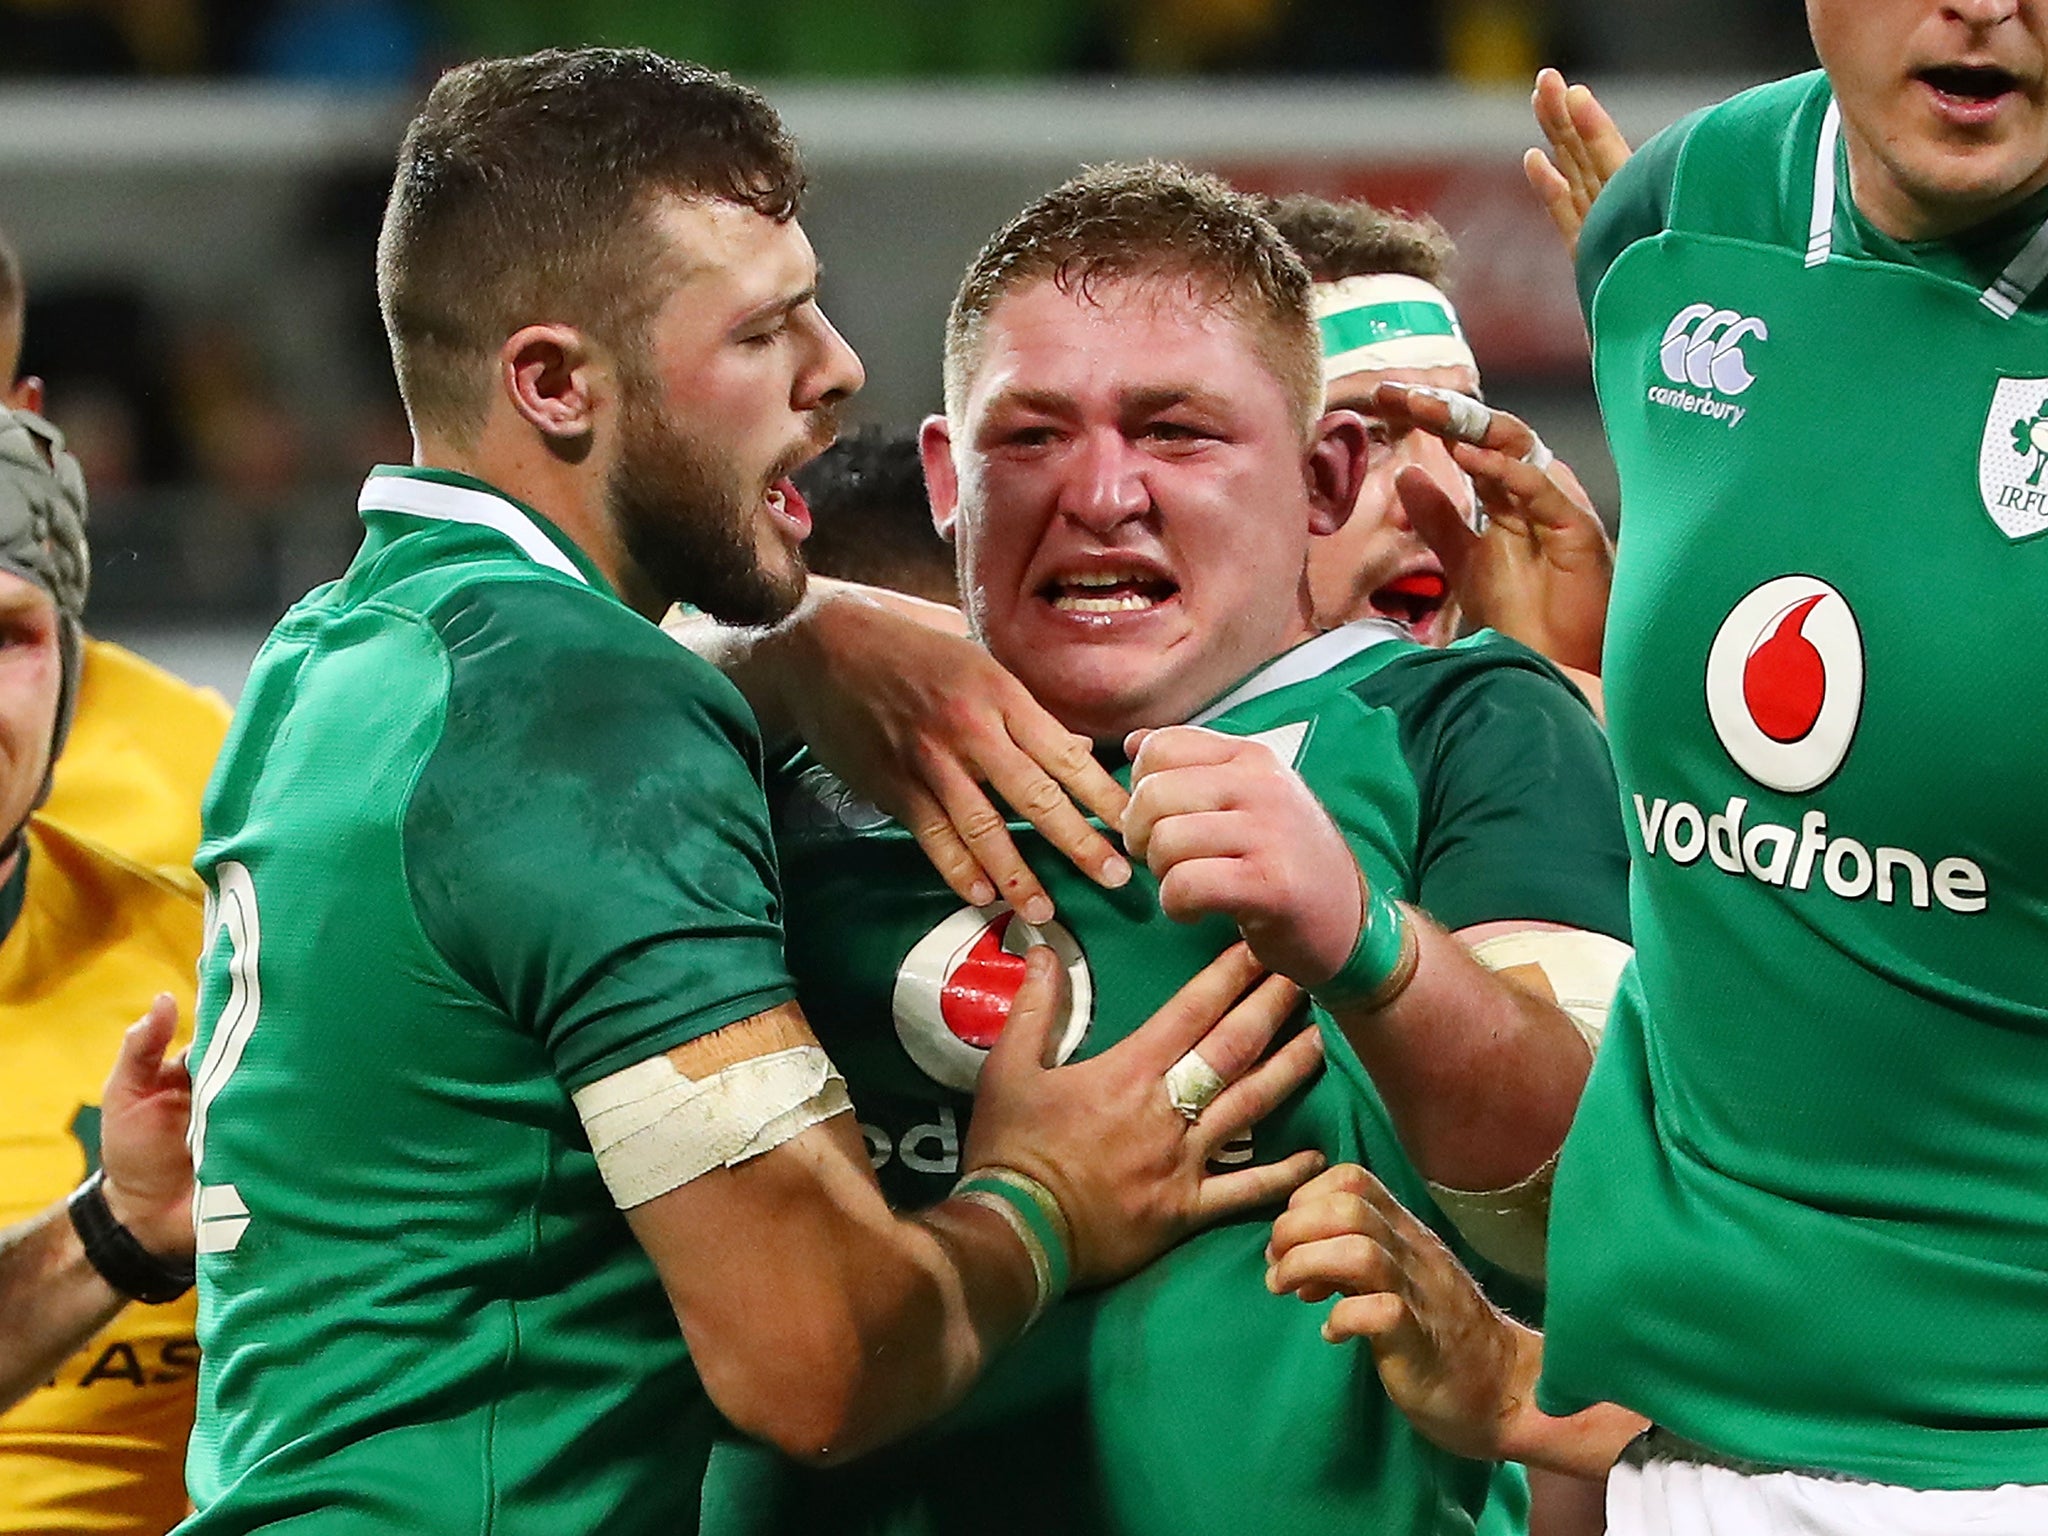 Tadhg Furlong celebrates scoring a try during Ireland's victory over Australia